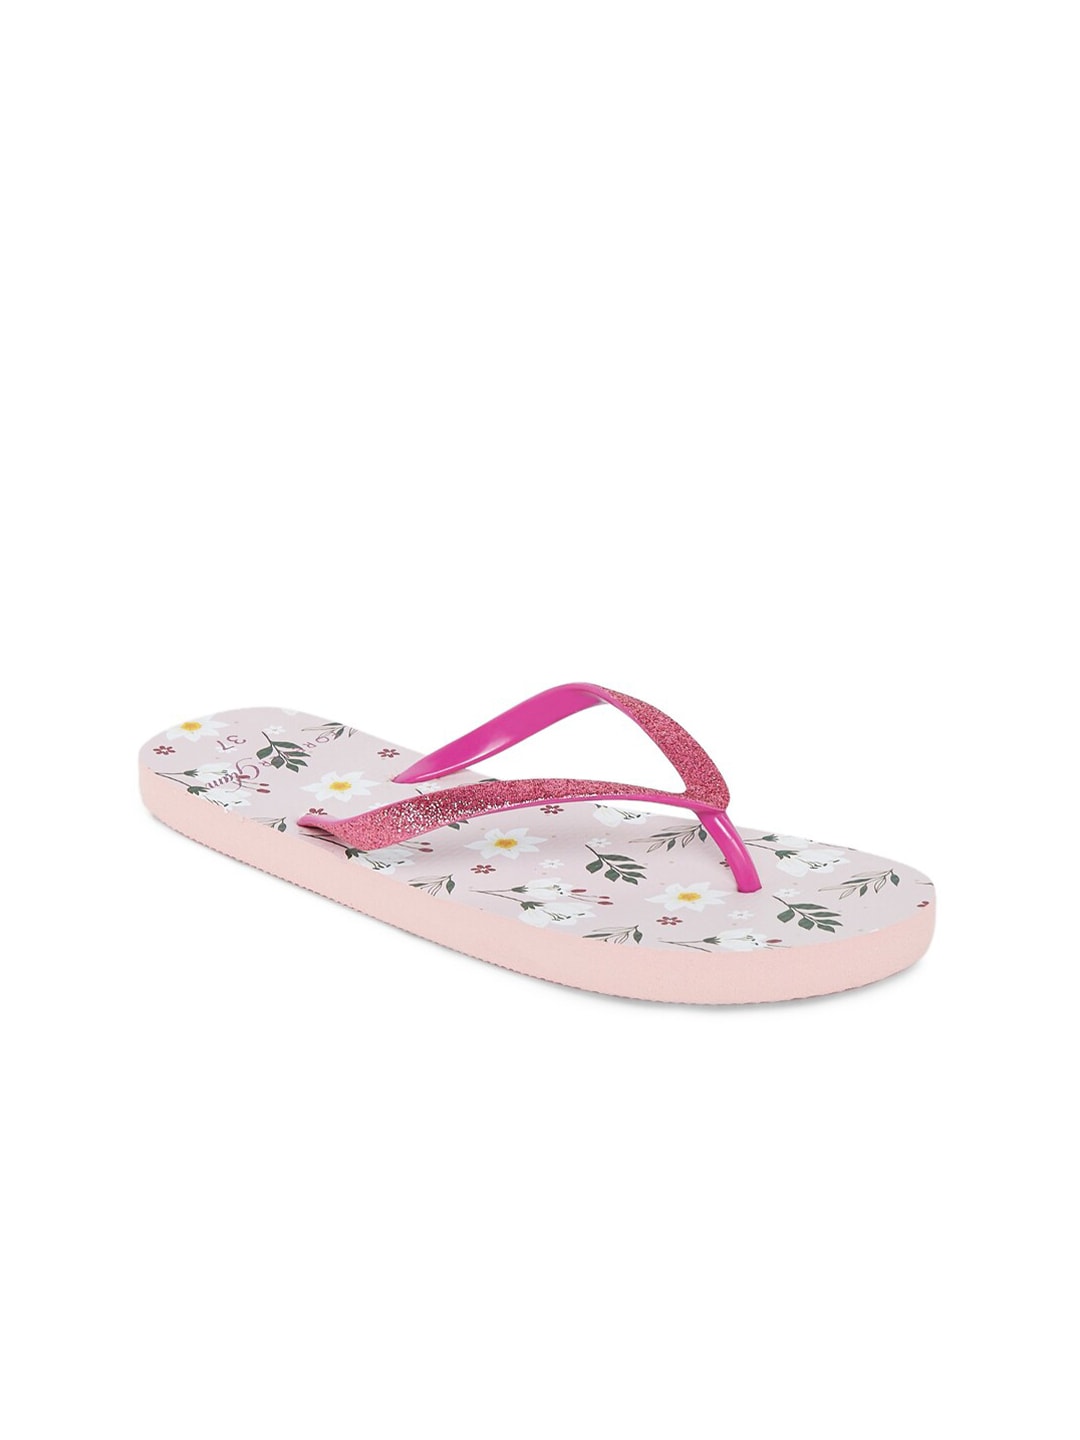 Forever Glam by Pantaloons Light Purple Floral Printed Thong Flip-Flops Price in India